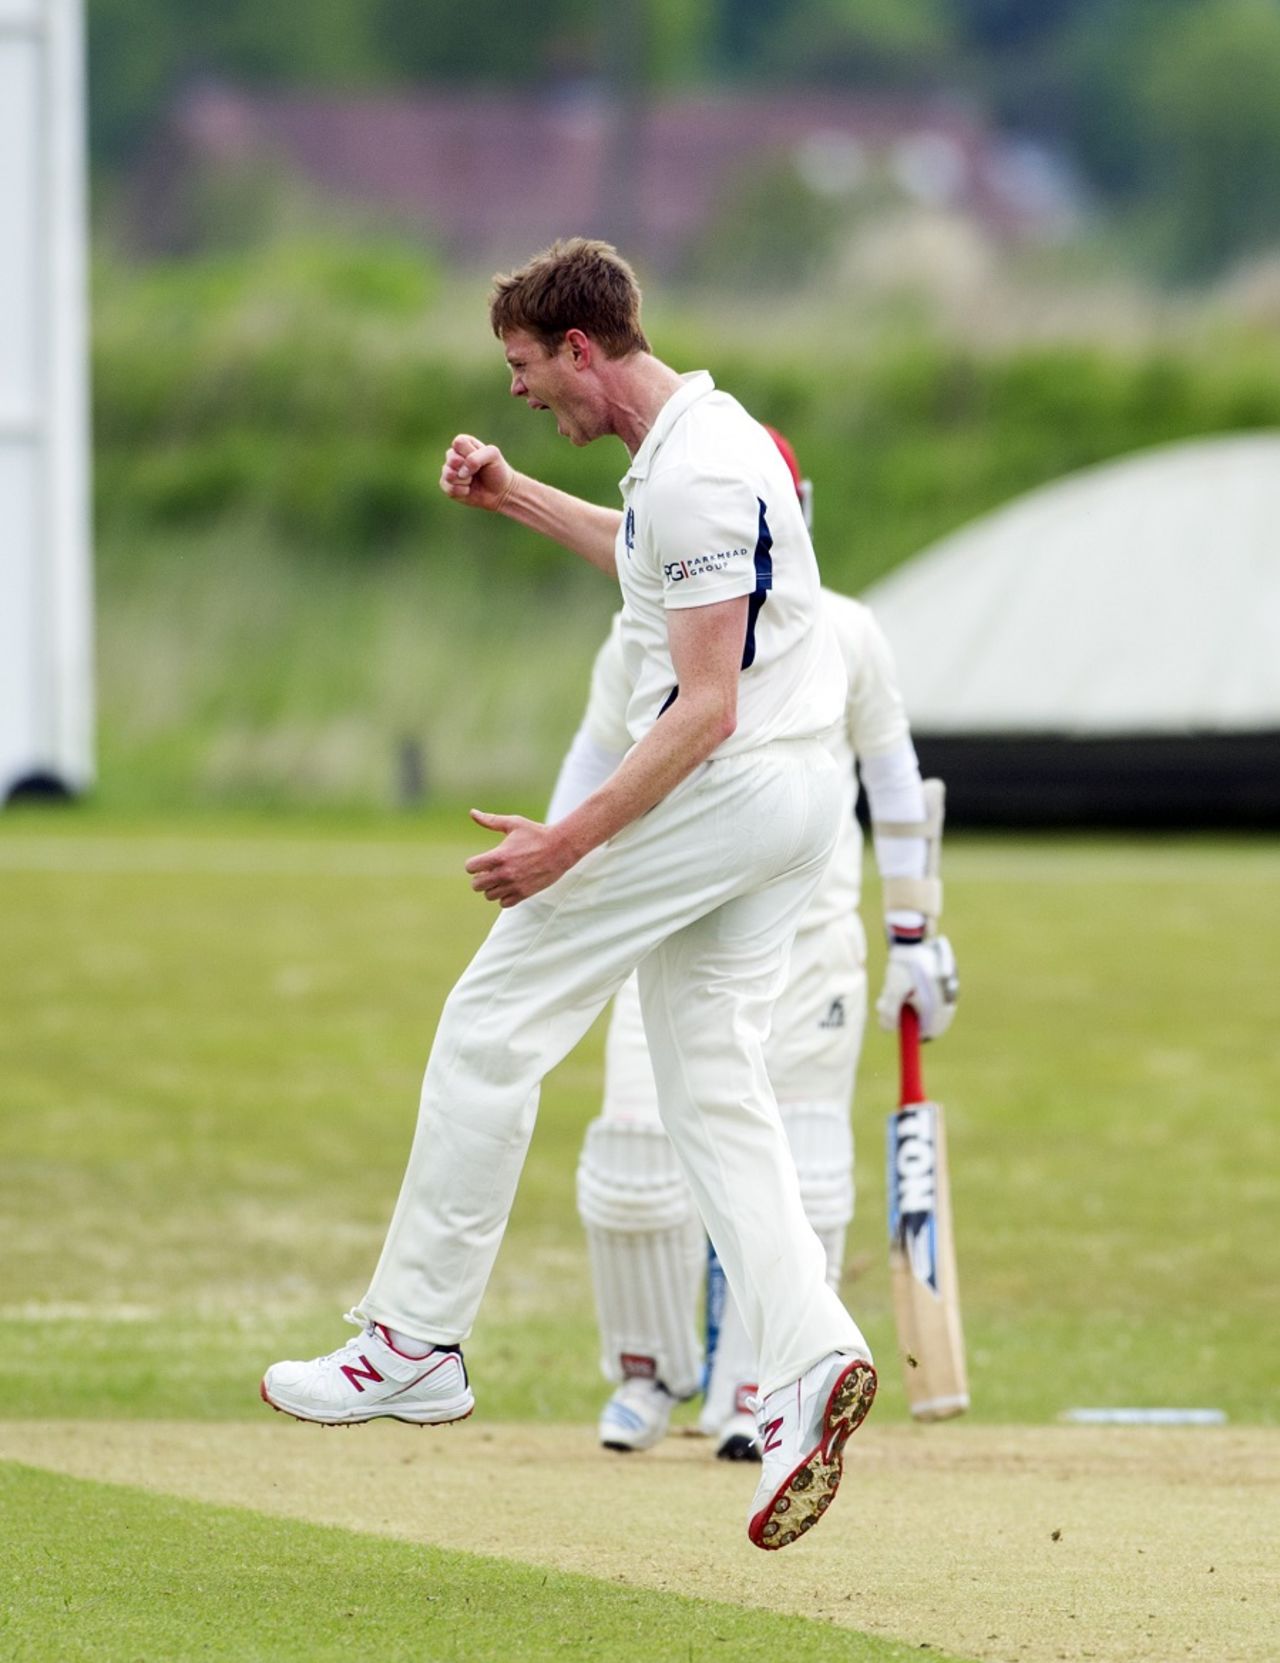 Alasdair Evans exults after picking up a wicket, Scotland v Afghanistan, ICC Intercontinental Cup, 3rd day, Stirling, June 4, 2015